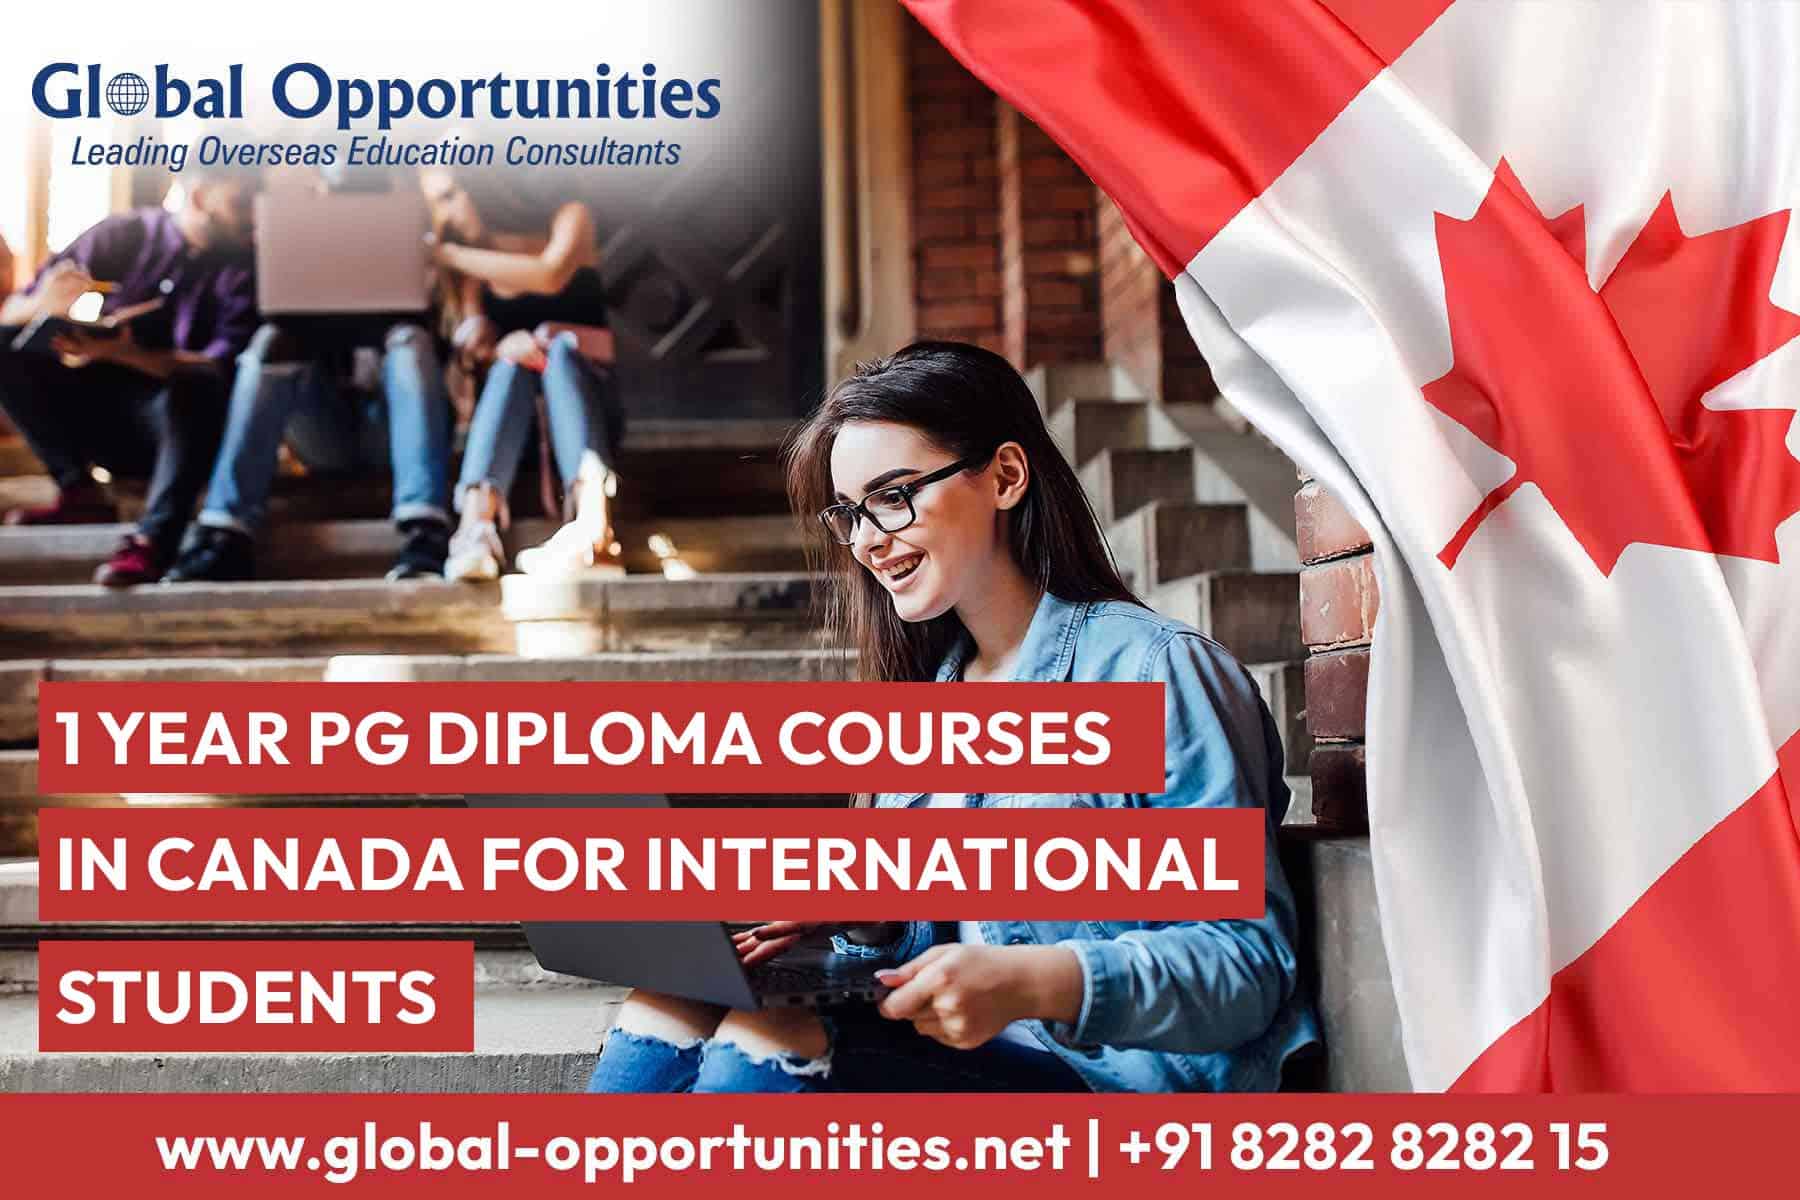 One Year PG Diploma Courses in Canada for International Students